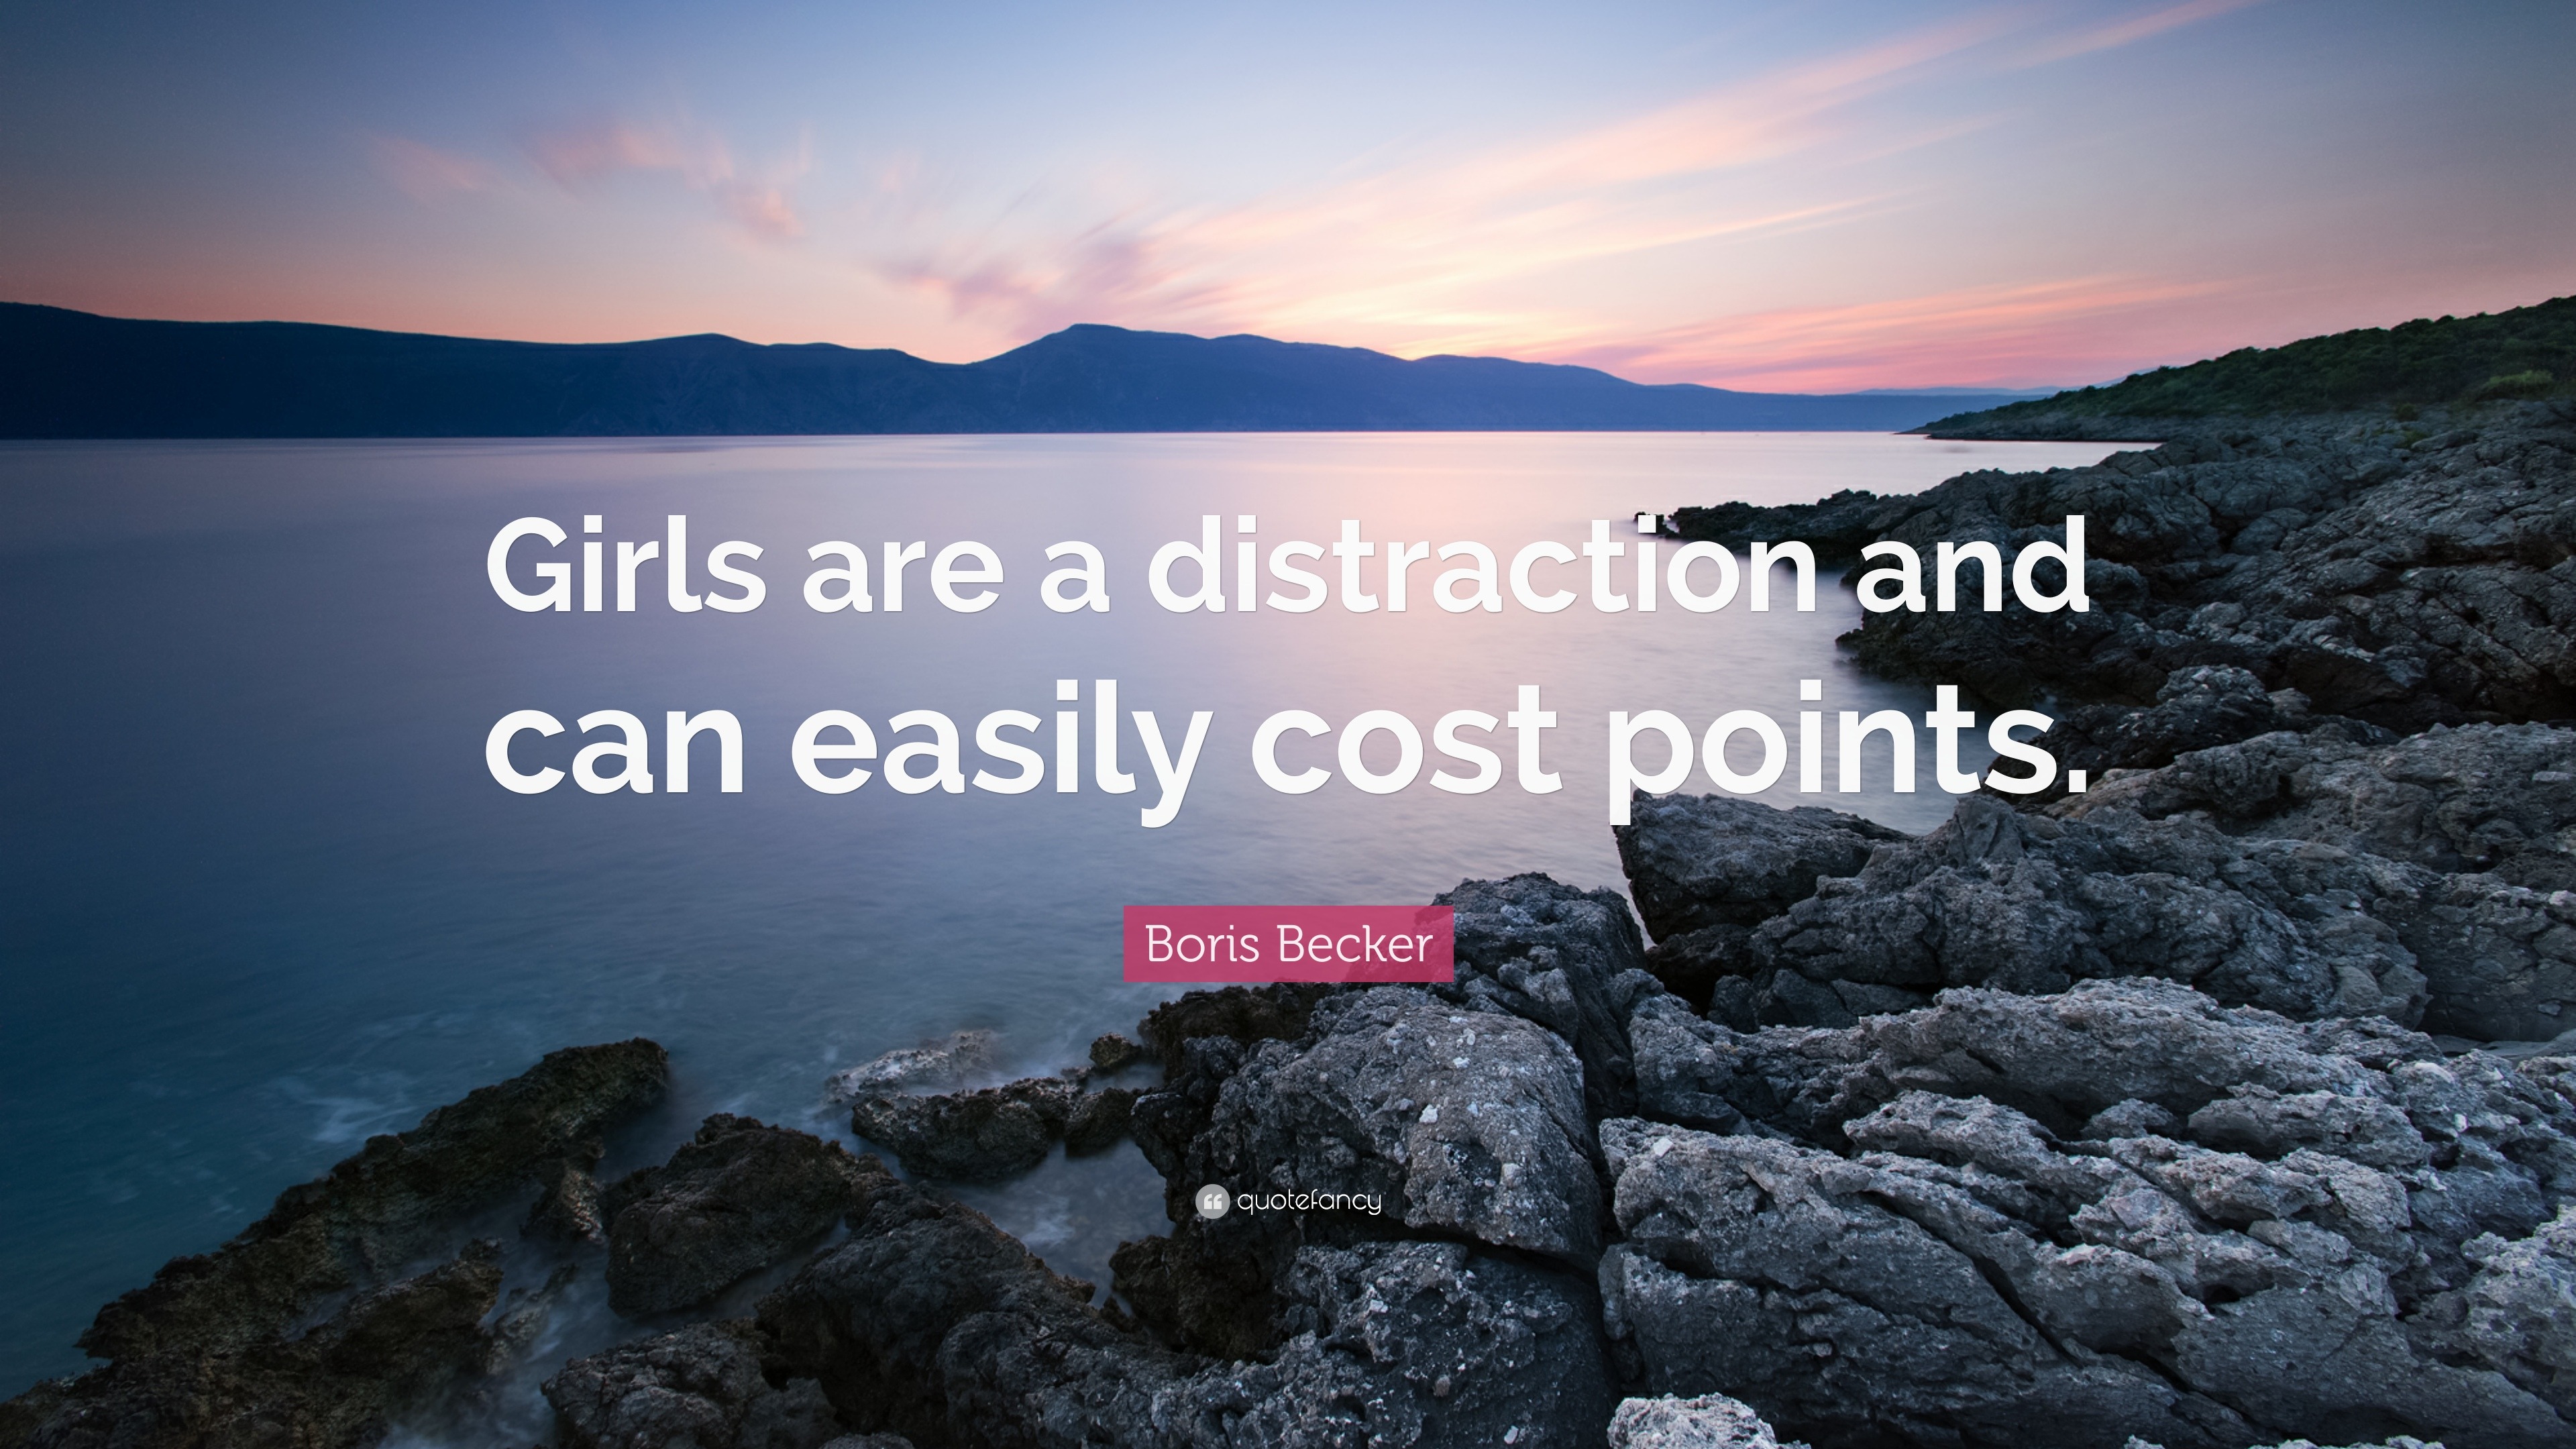 https://quotefancy.com/media/wallpaper/3840x2160/847111-Boris-Becker-Quote-Girls-are-a-distraction-and-can-easily-cost.jpg